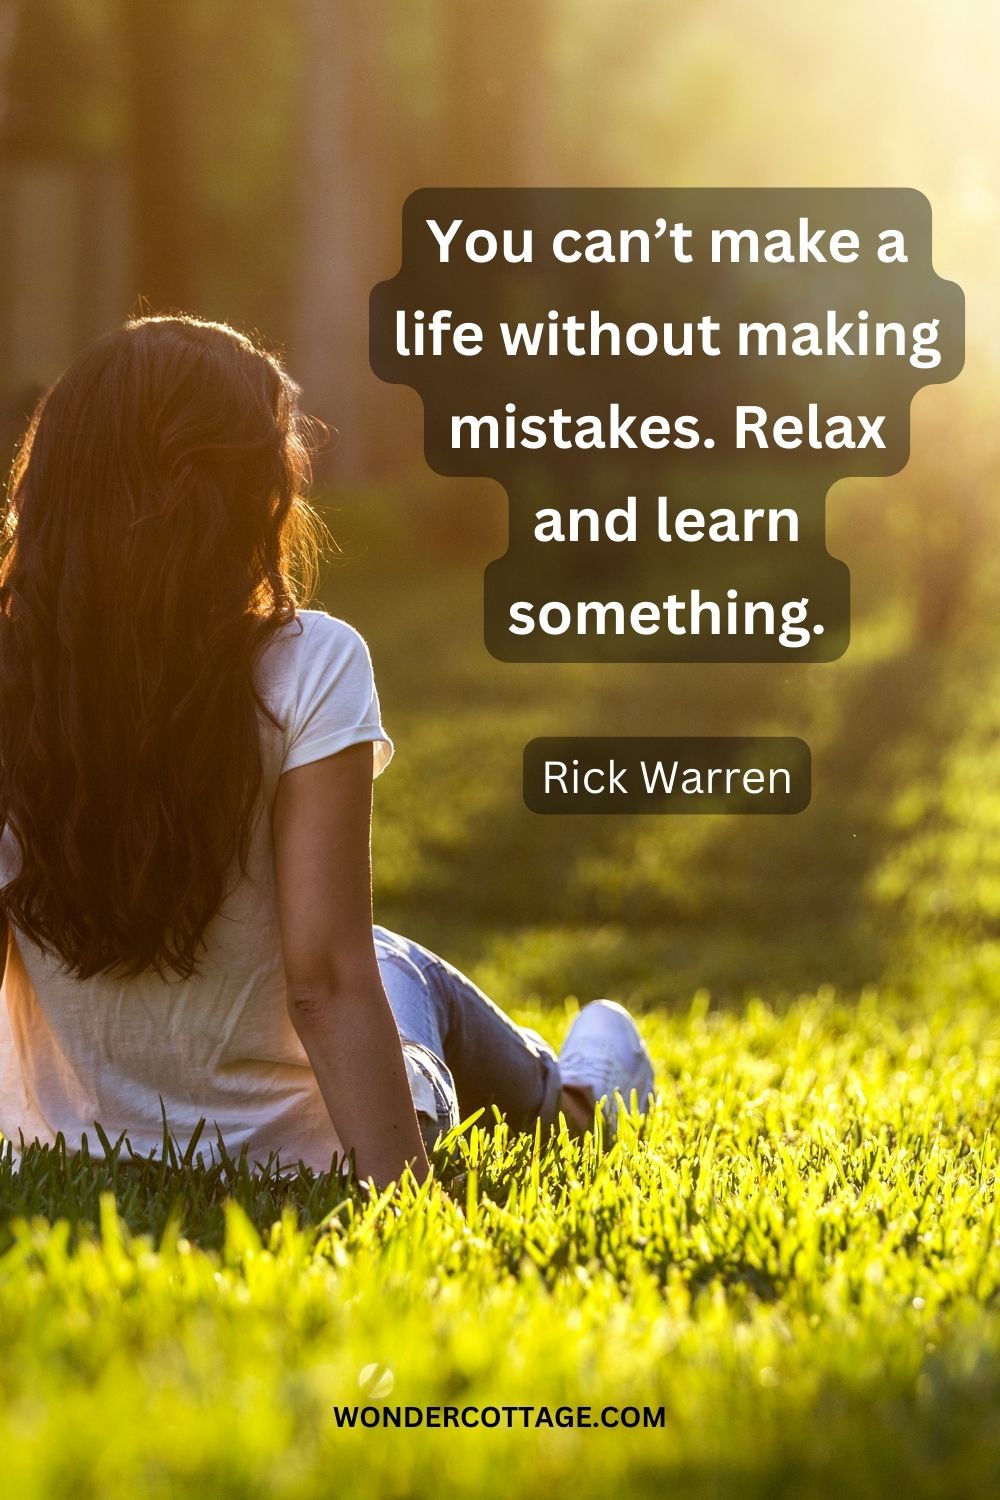 You can’t make a life without making mistakes. Relax and learn something. Rick Warren